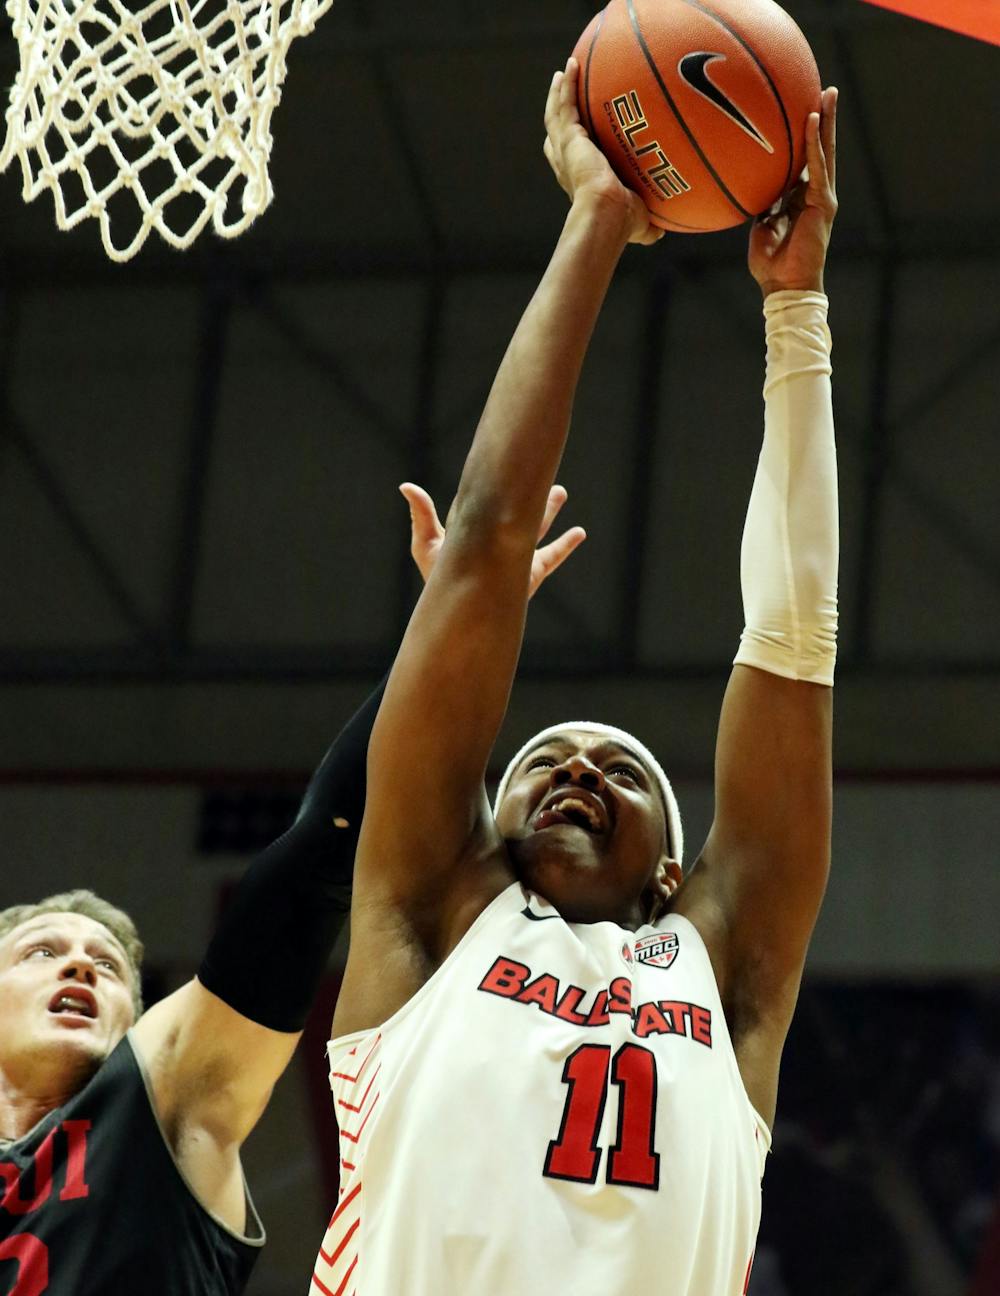 Coleman’s efficiency on offense highlights win over IUPUI 